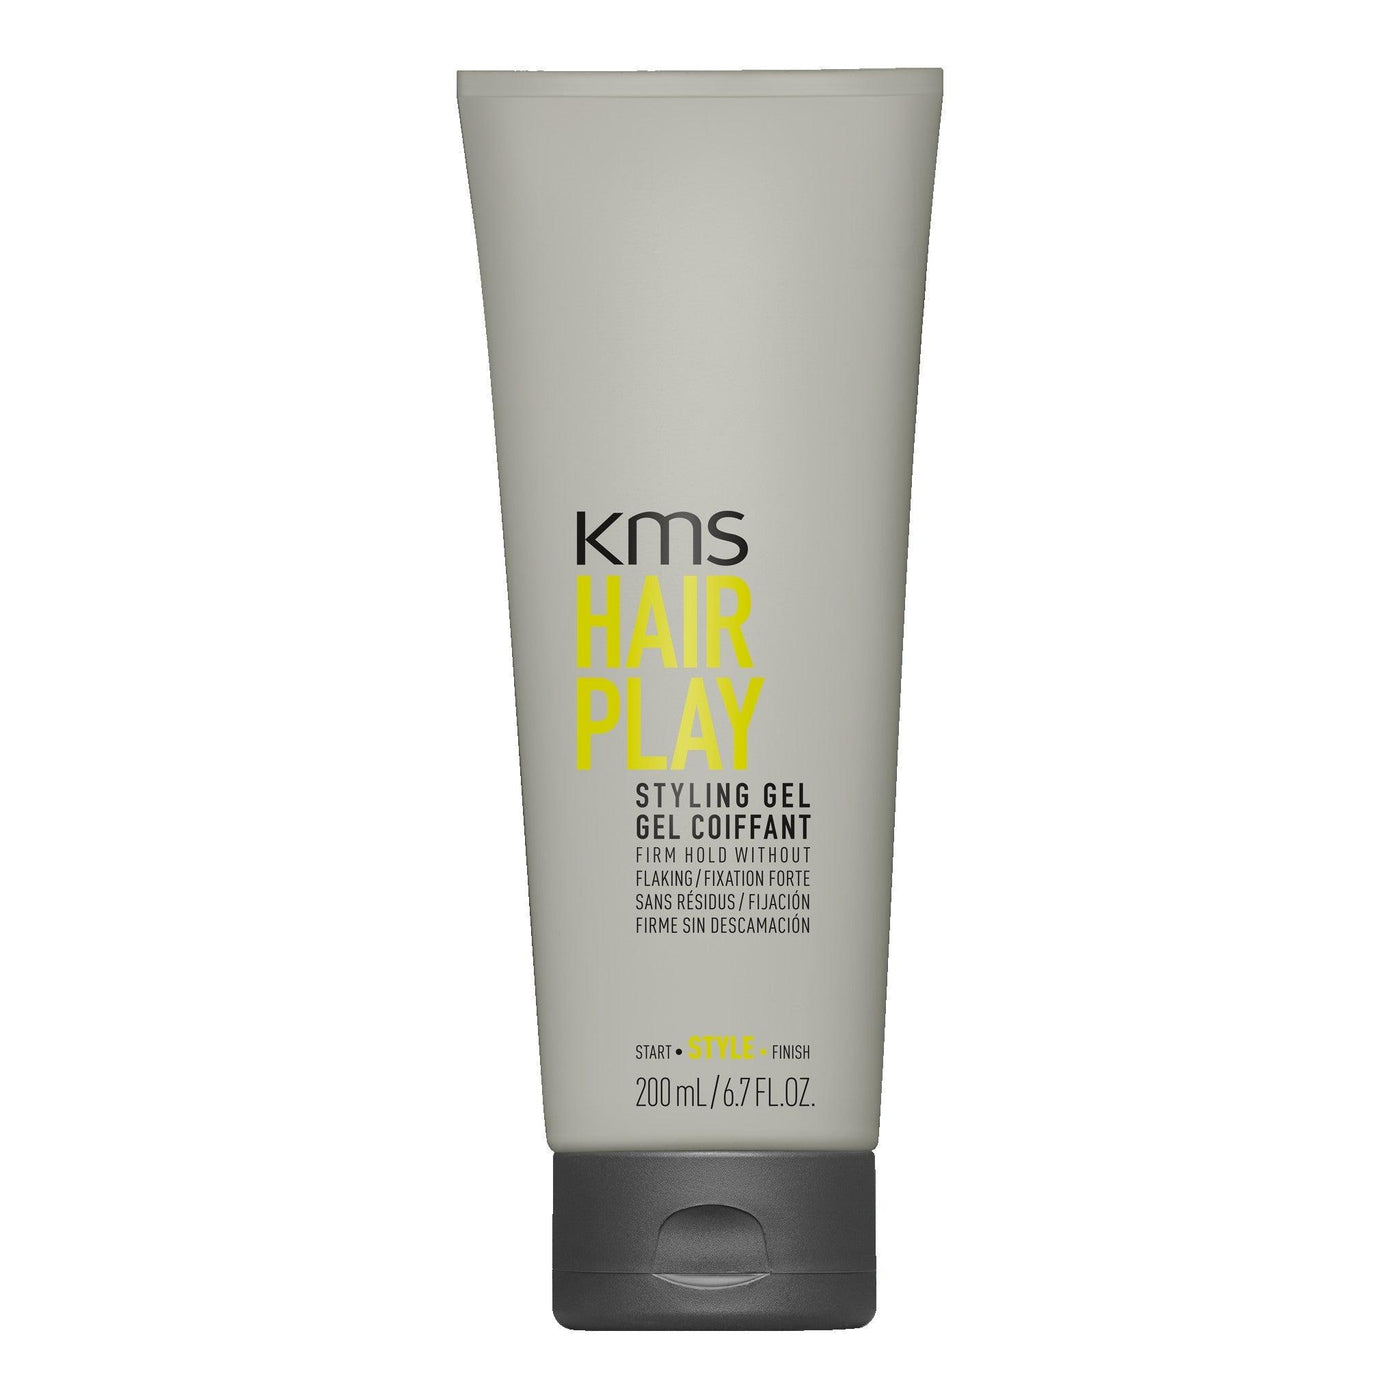 Kms Hairplay Styling Gel 200ml KMS Boutique Deauville